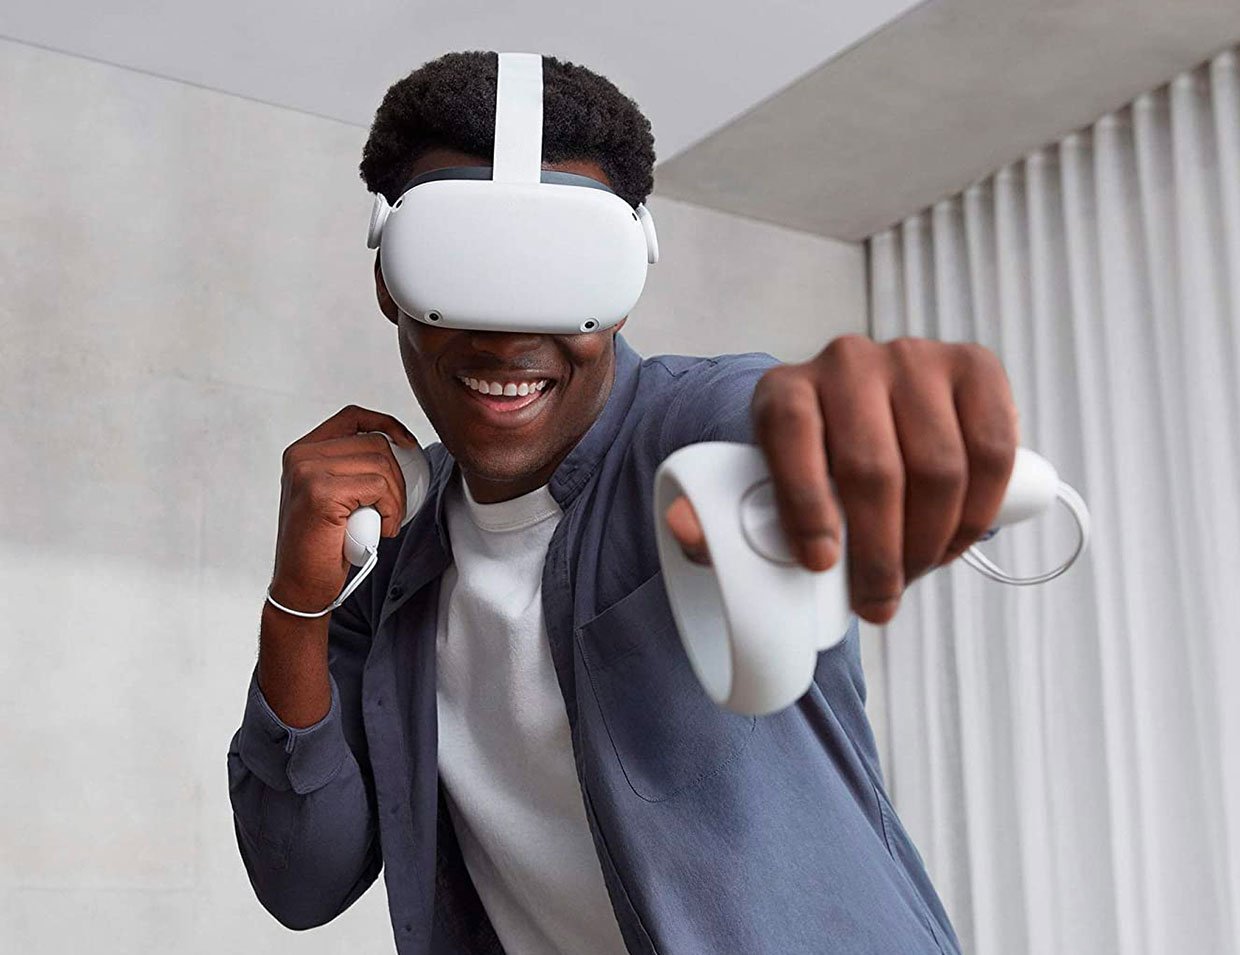 Oculus Quest 2 Wireless VR Headset Improves Speed, Resolution, and More